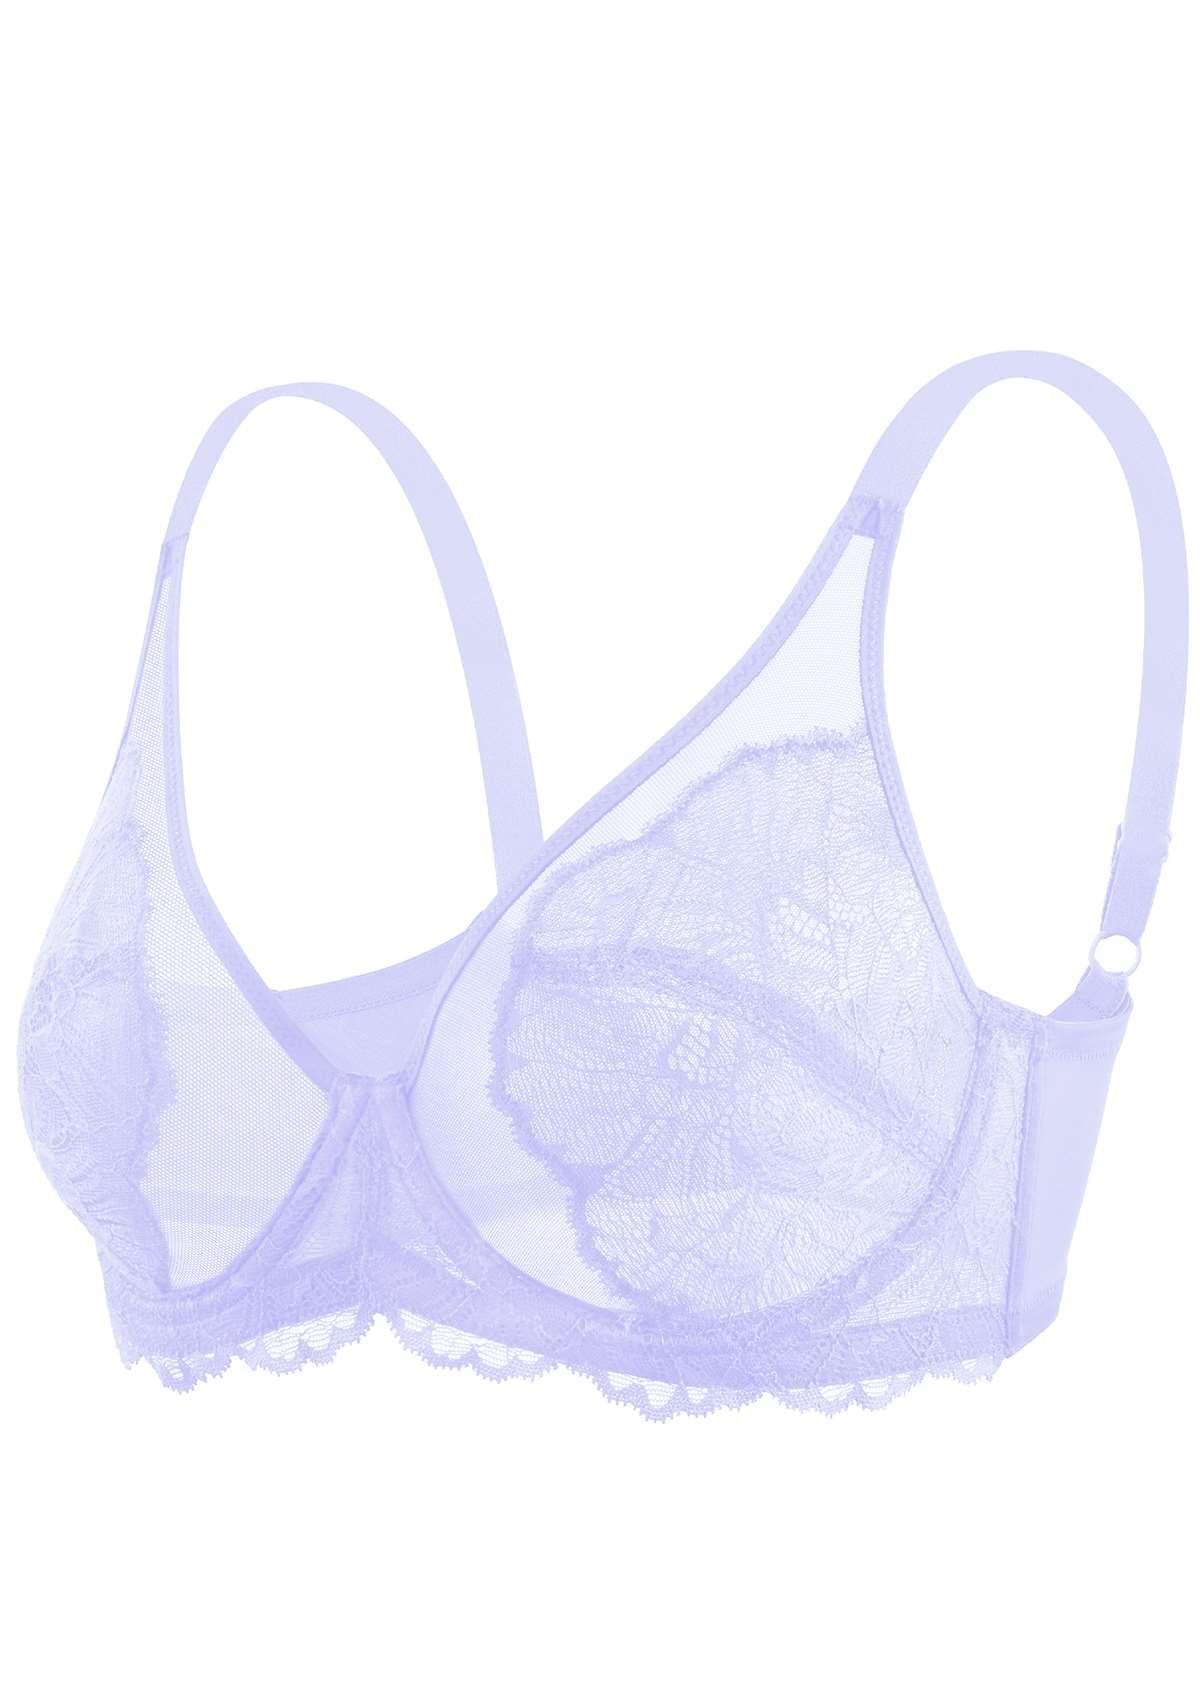 HSIA Blossom Transparent Lace Bra: Plus Size Wired Back Smoothing Bra - Light Purple / 46 / DD/E